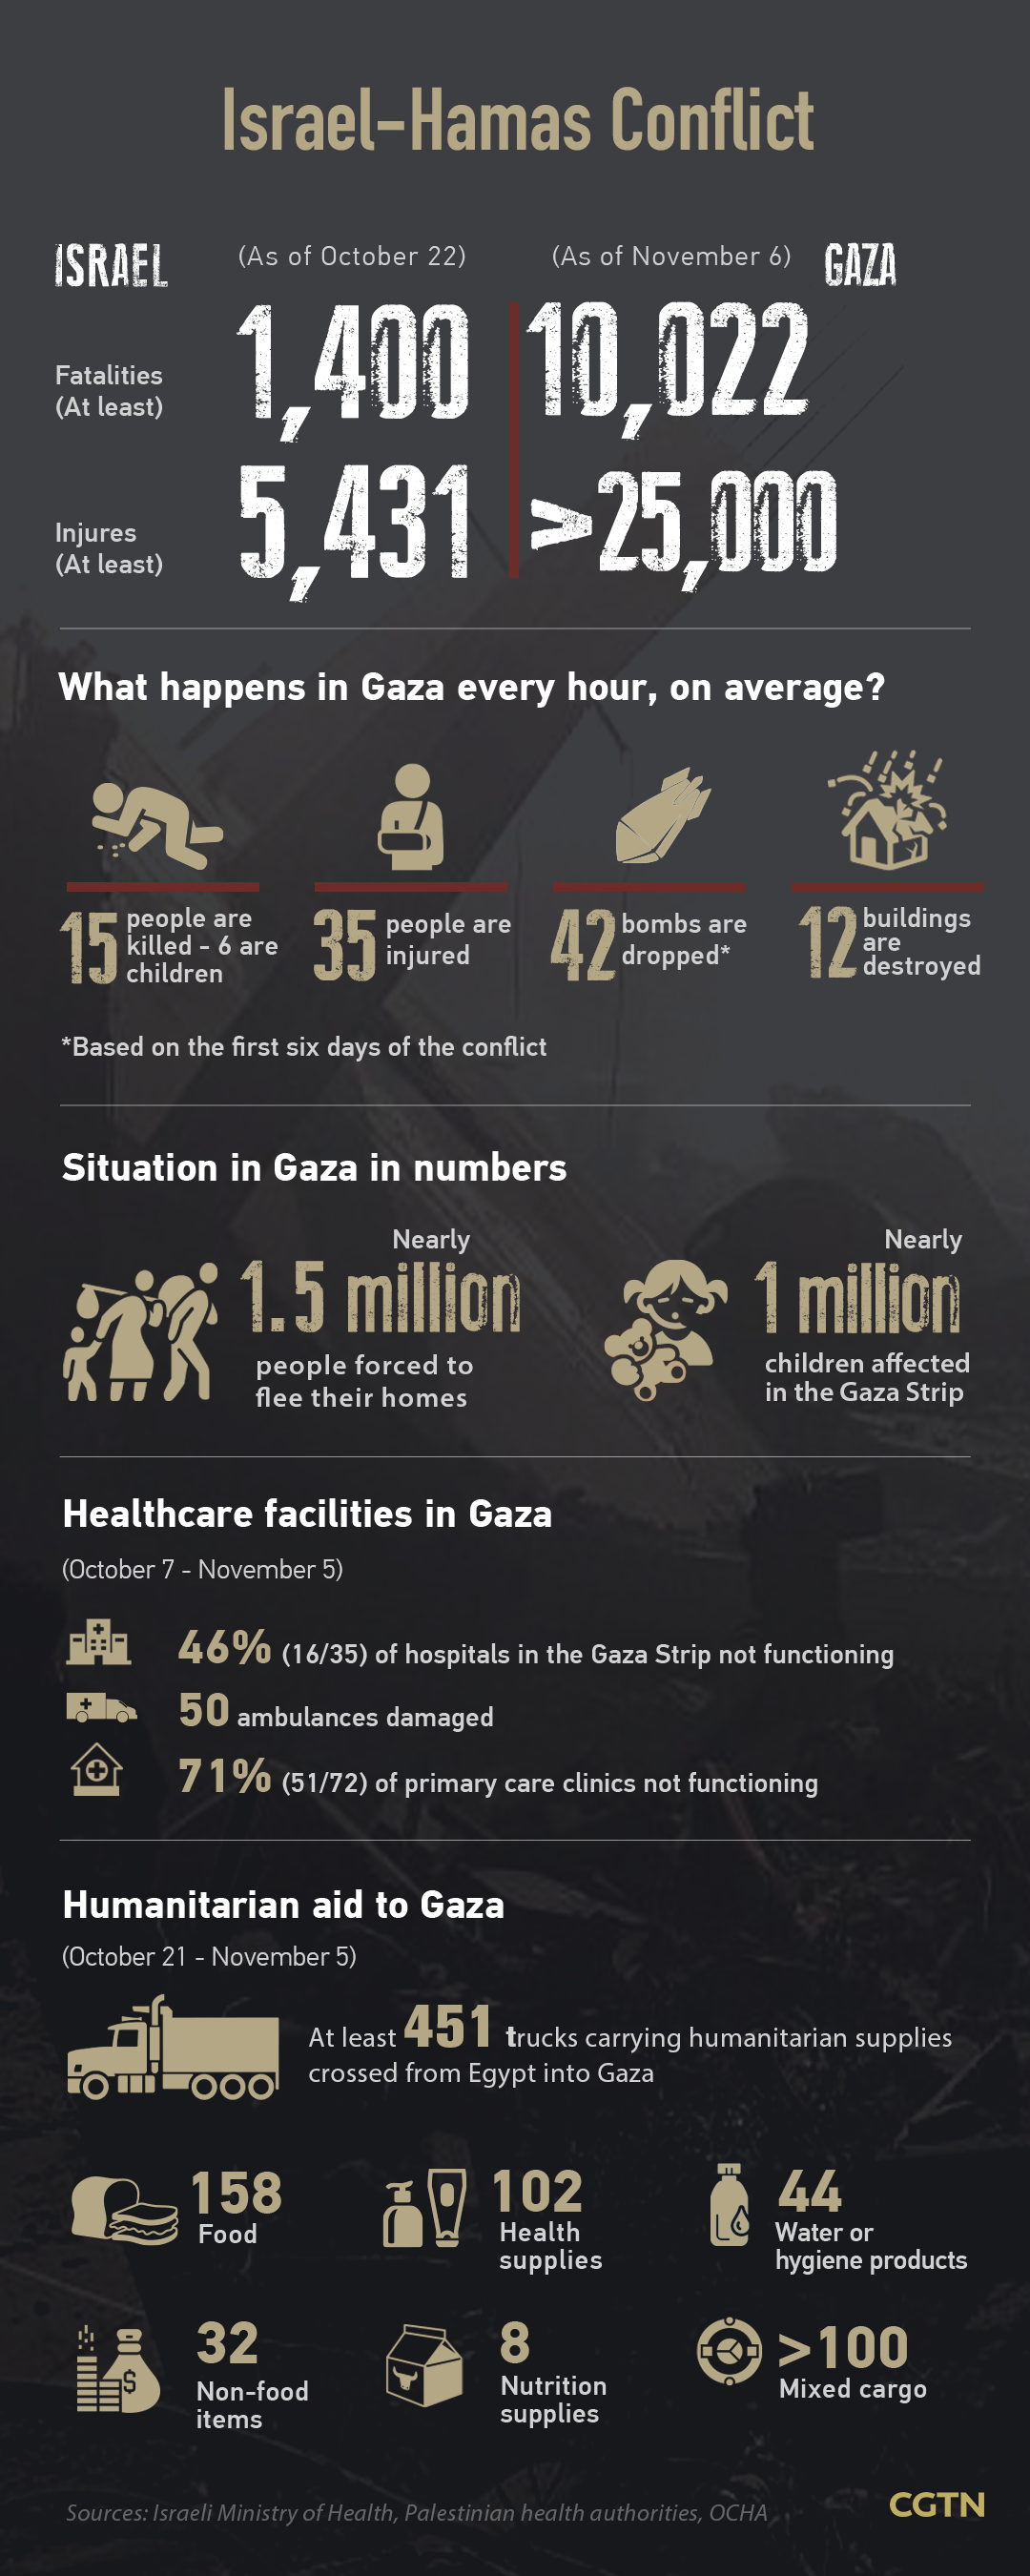 No peace in sight as intensifying Gaza war enters first month